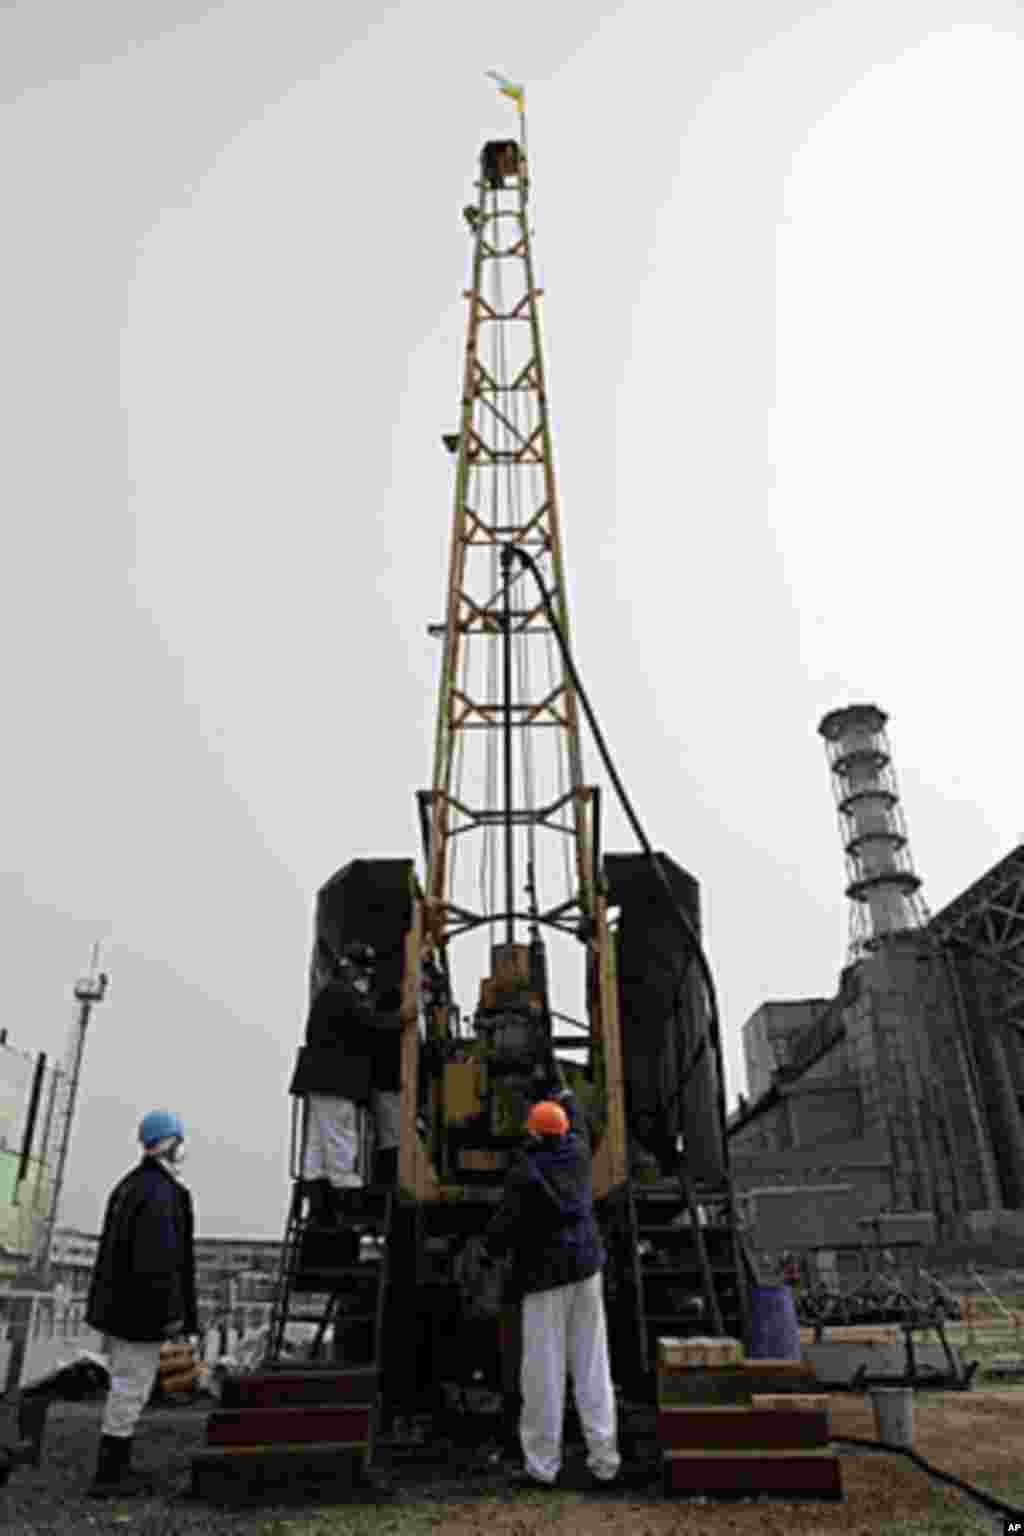 At the location of each foundation pile a drill removes a sample of potentially contaminated soil for geotechnical and radiological characterization, (VOA - D. Markosian, April 2011)